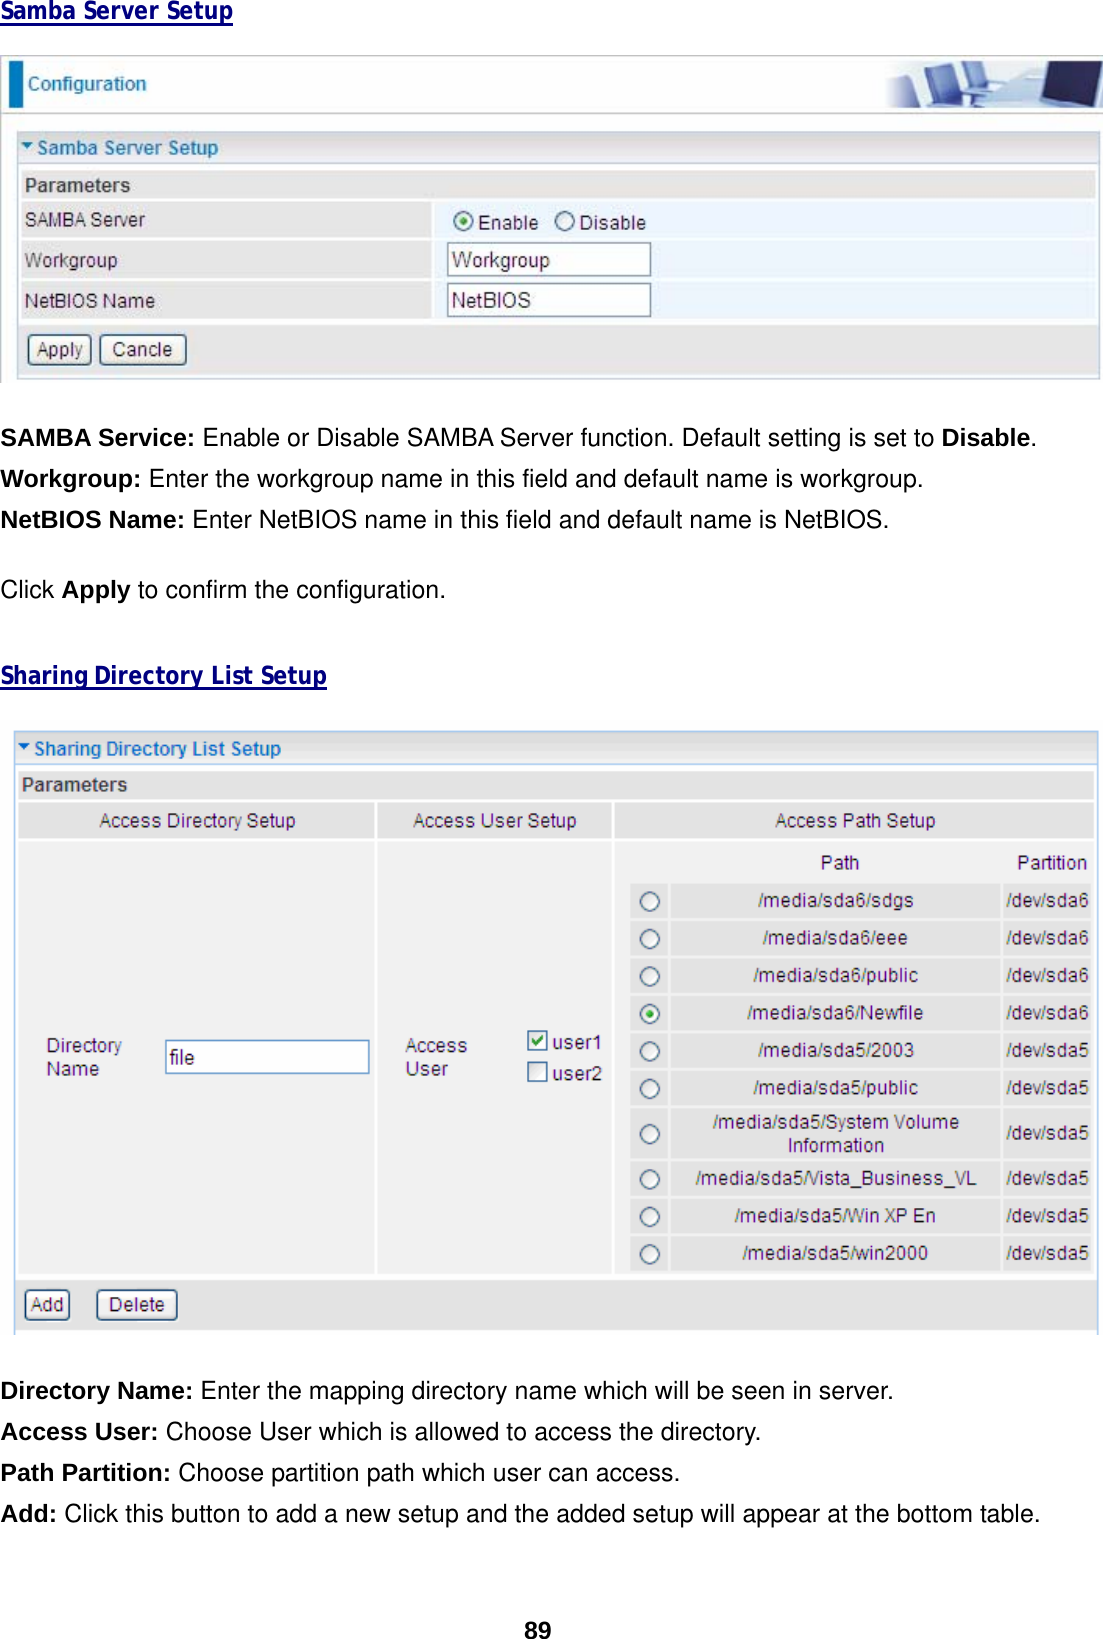  89 Samba Server Setup    SAMBA Service: Enable or Disable SAMBA Server function. Default setting is set to Disable.  Workgroup: Enter the workgroup name in this field and default name is workgroup. NetBIOS Name: Enter NetBIOS name in this field and default name is NetBIOS.  Click Apply to confirm the configuration.   Sharing Directory List Setup   Directory Name: Enter the mapping directory name which will be seen in server. Access User: Choose User which is allowed to access the directory. Path Partition: Choose partition path which user can access. Add: Click this button to add a new setup and the added setup will appear at the bottom table.  